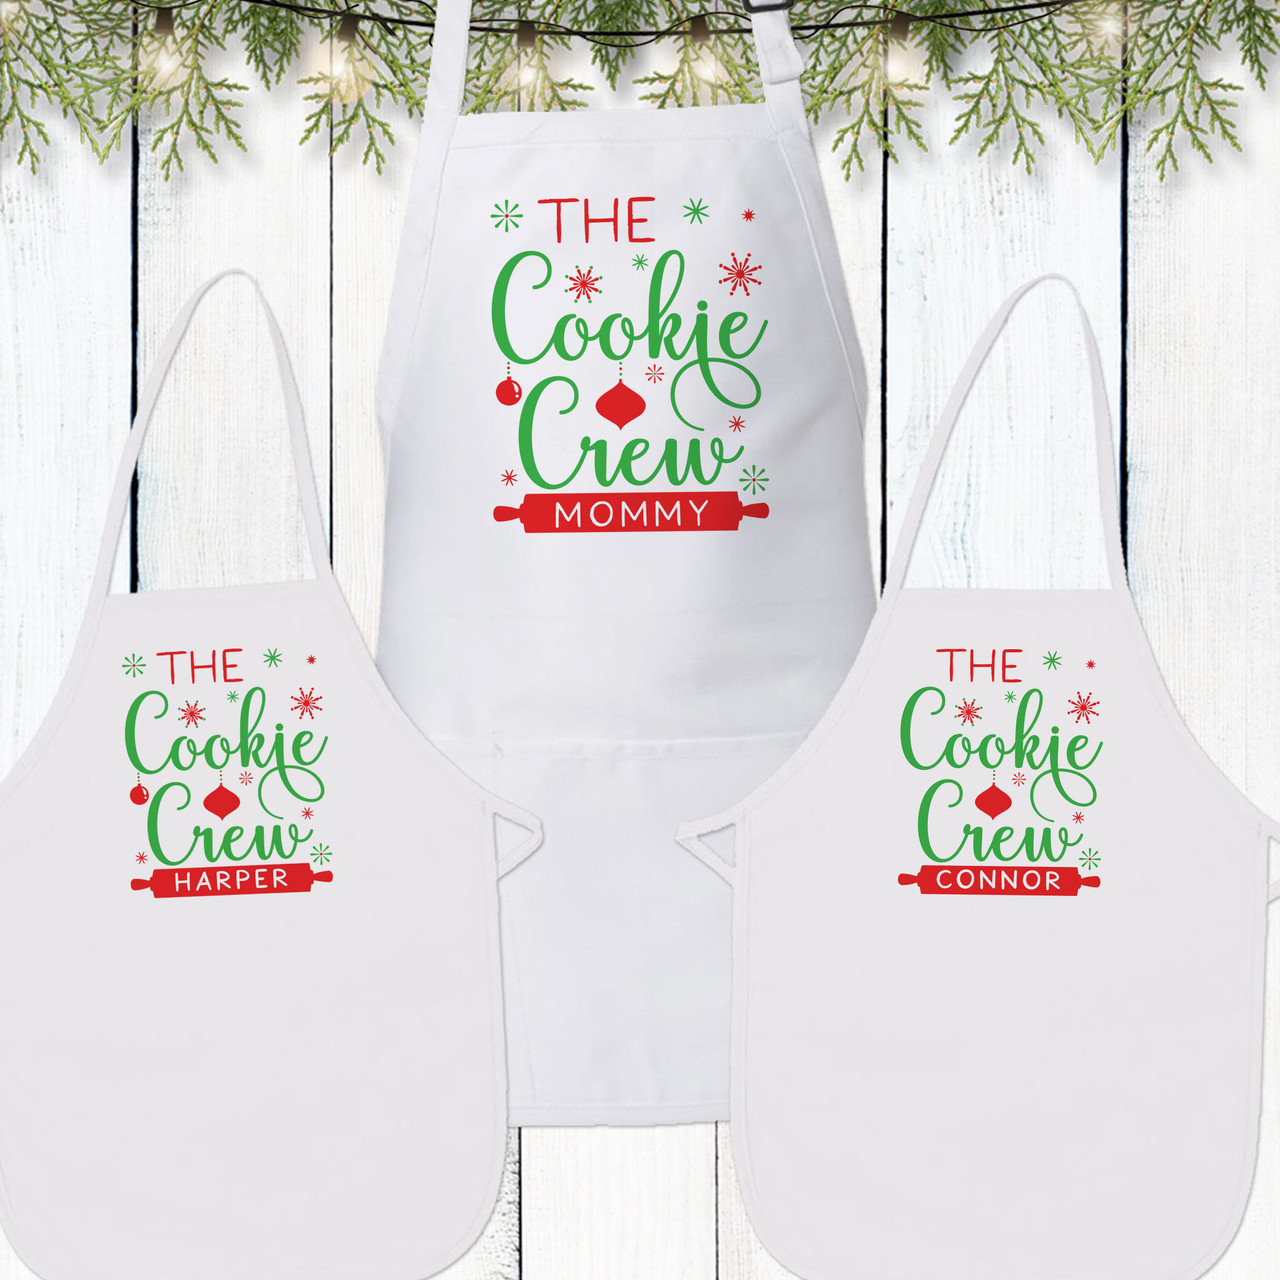 Custom Red or Green Aprons for Women and Adults, Personalized Baking Crew A